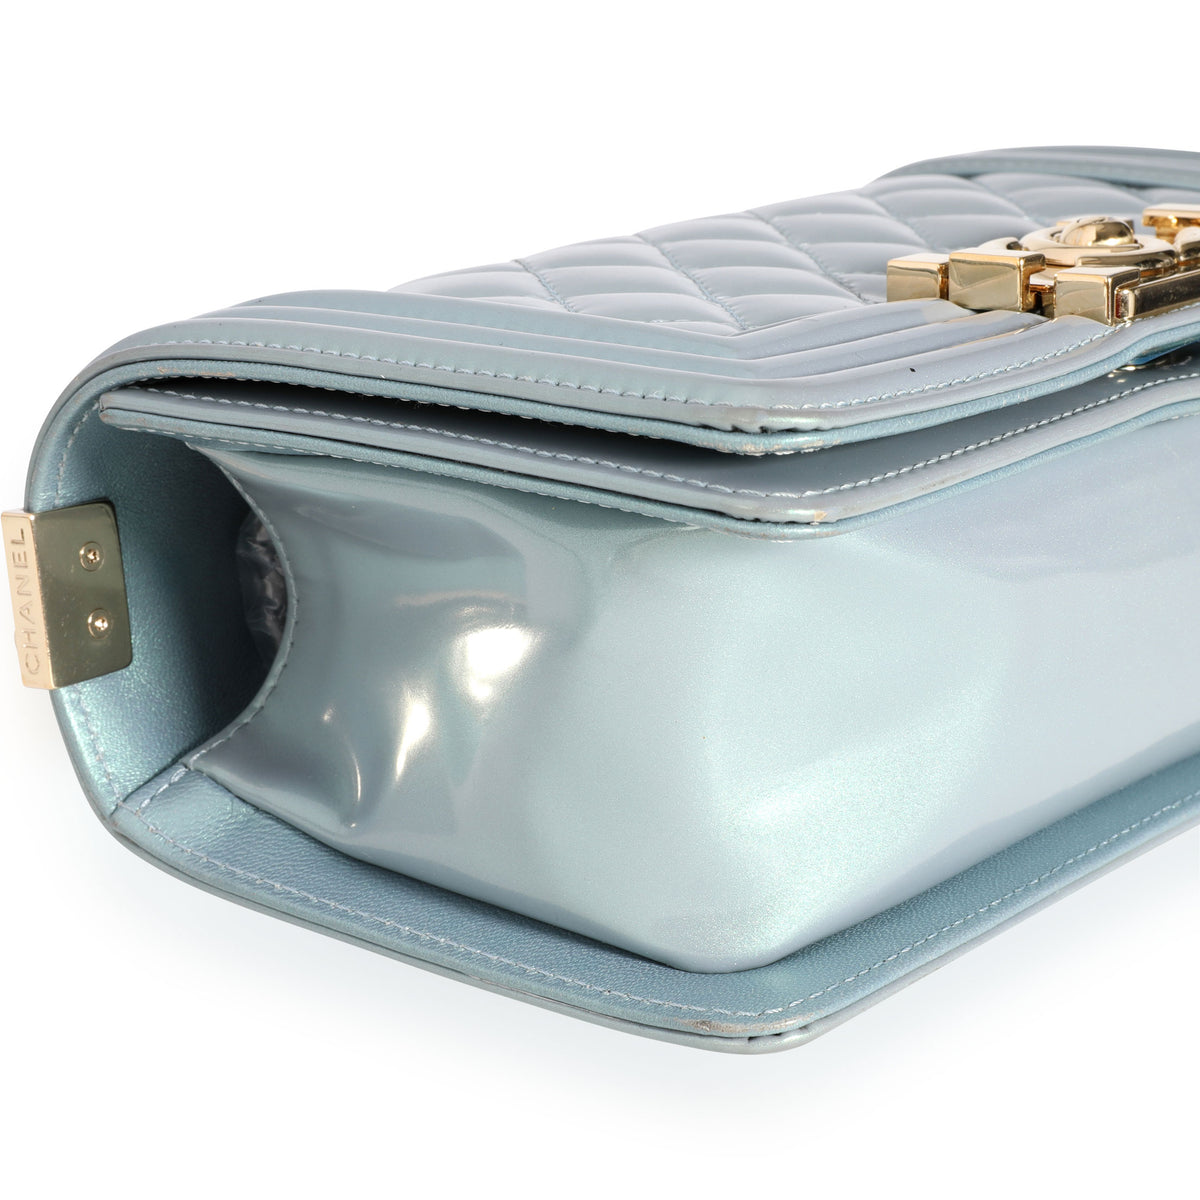 Chanel Iridescent Light Blue Patent Leather Small Boy Bag